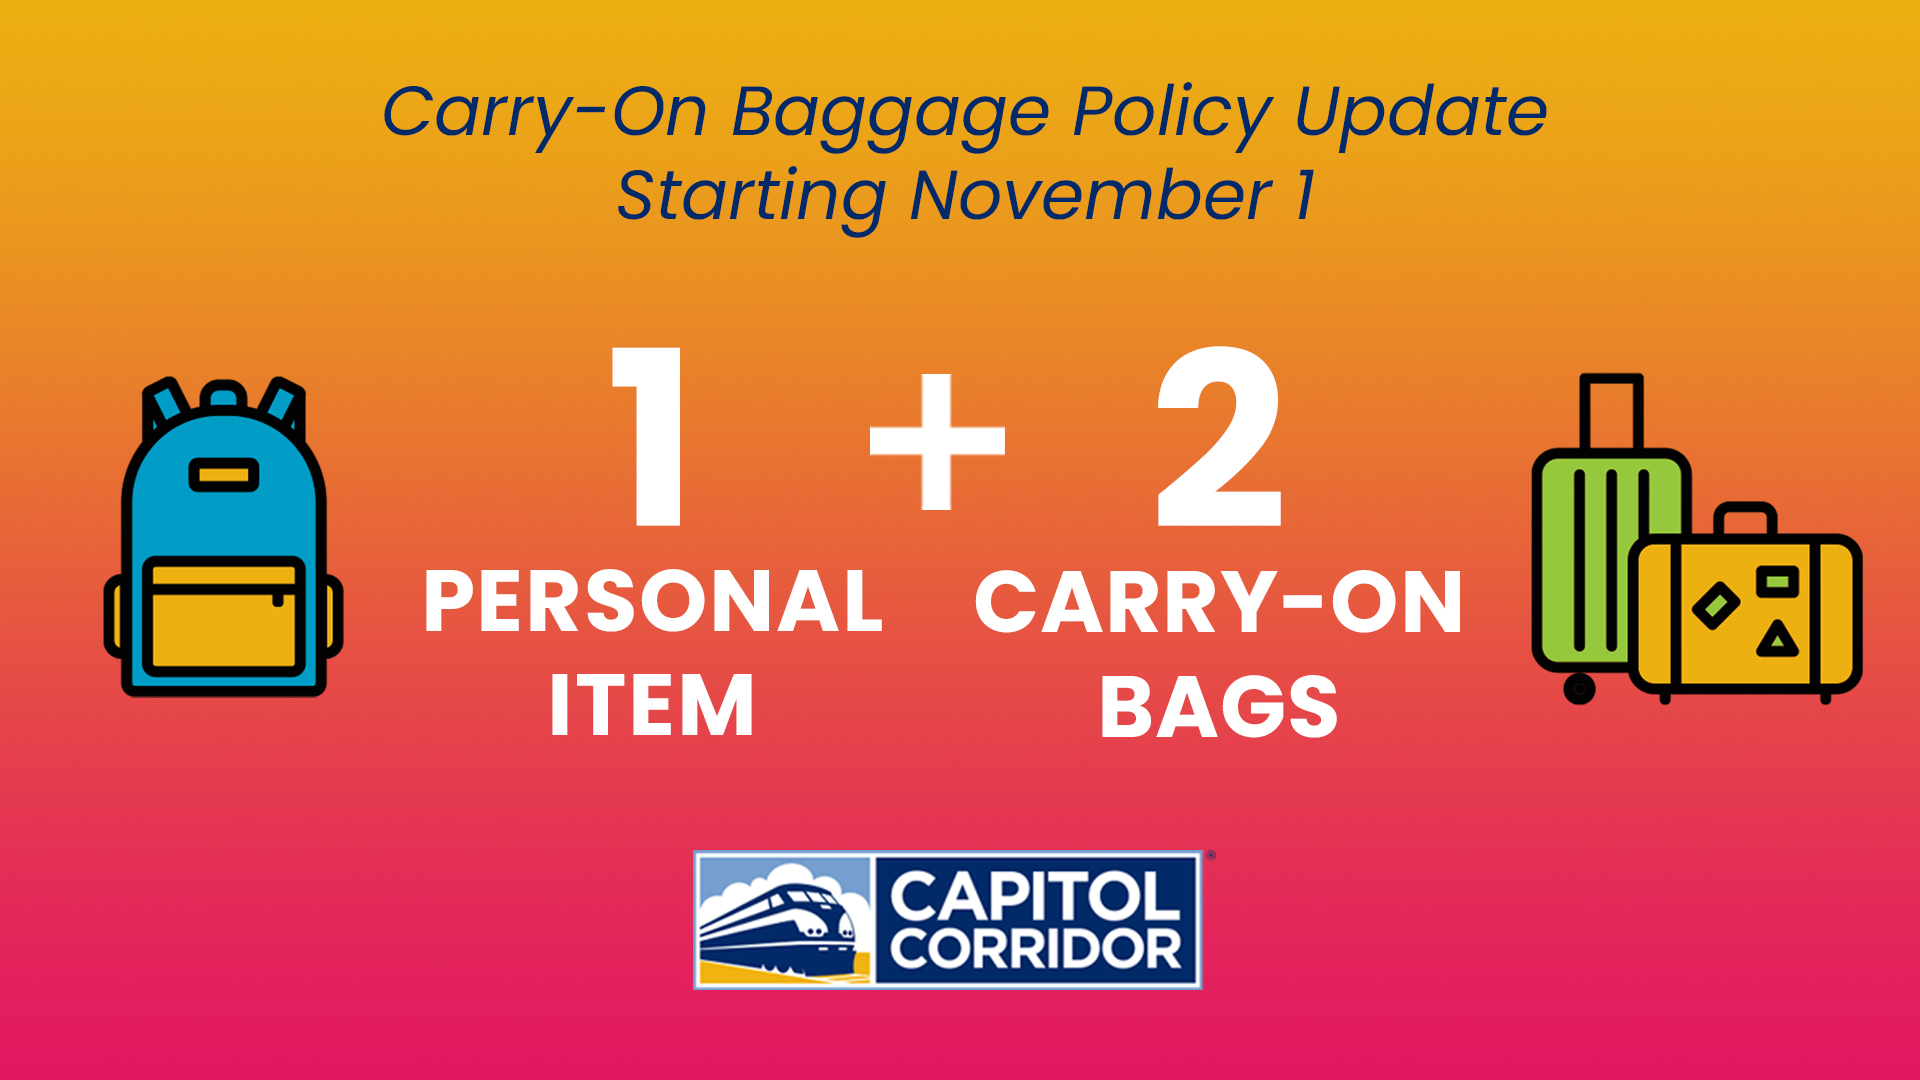 Carry-on baggage